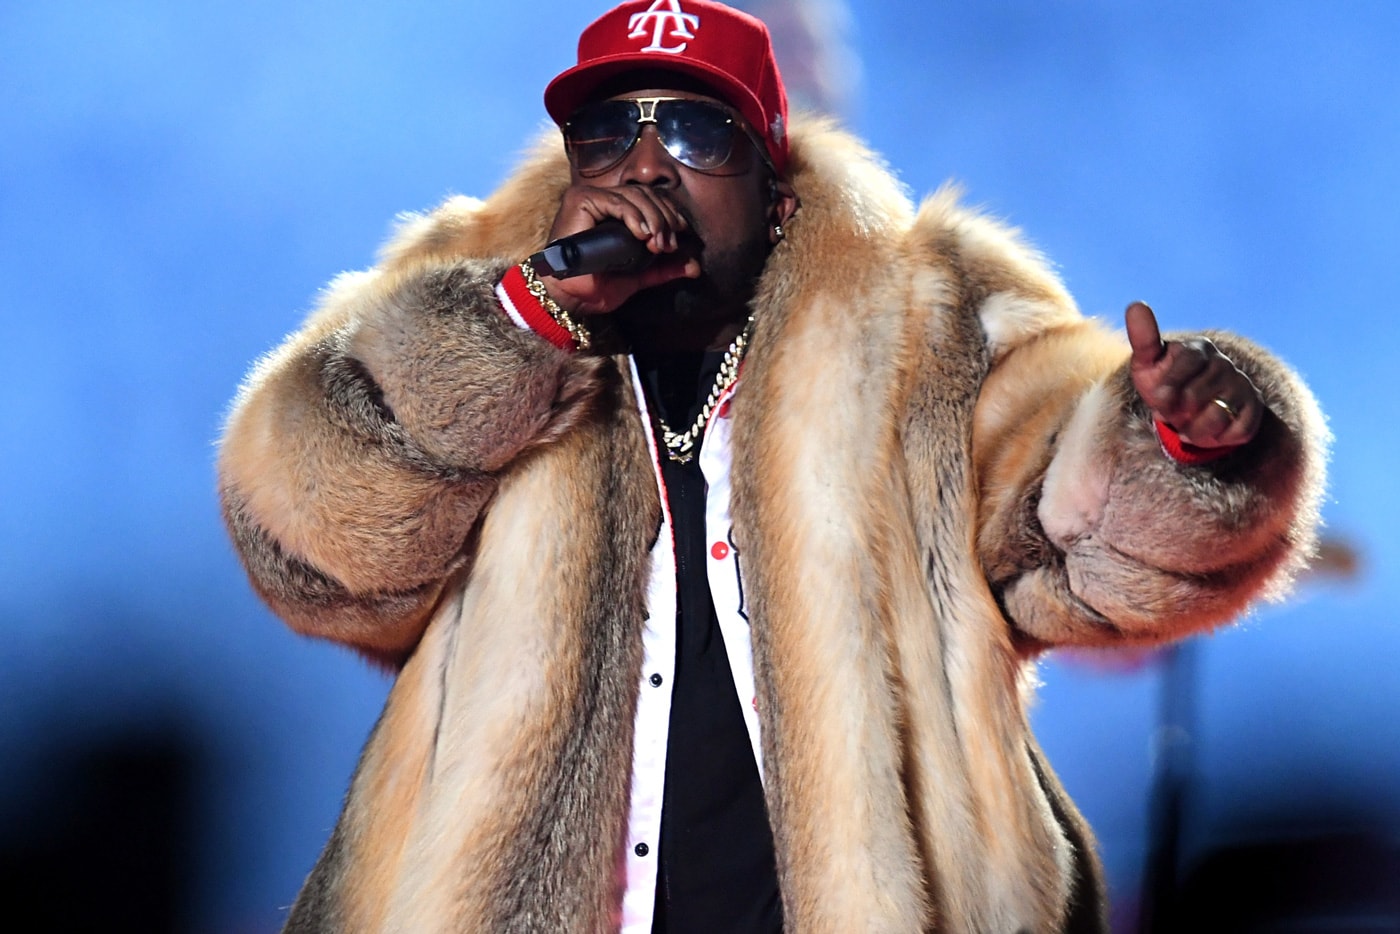 Big Boi Outkast Biopic Film Movie Lee Daniels Andre 3000 HipHopDX Interview